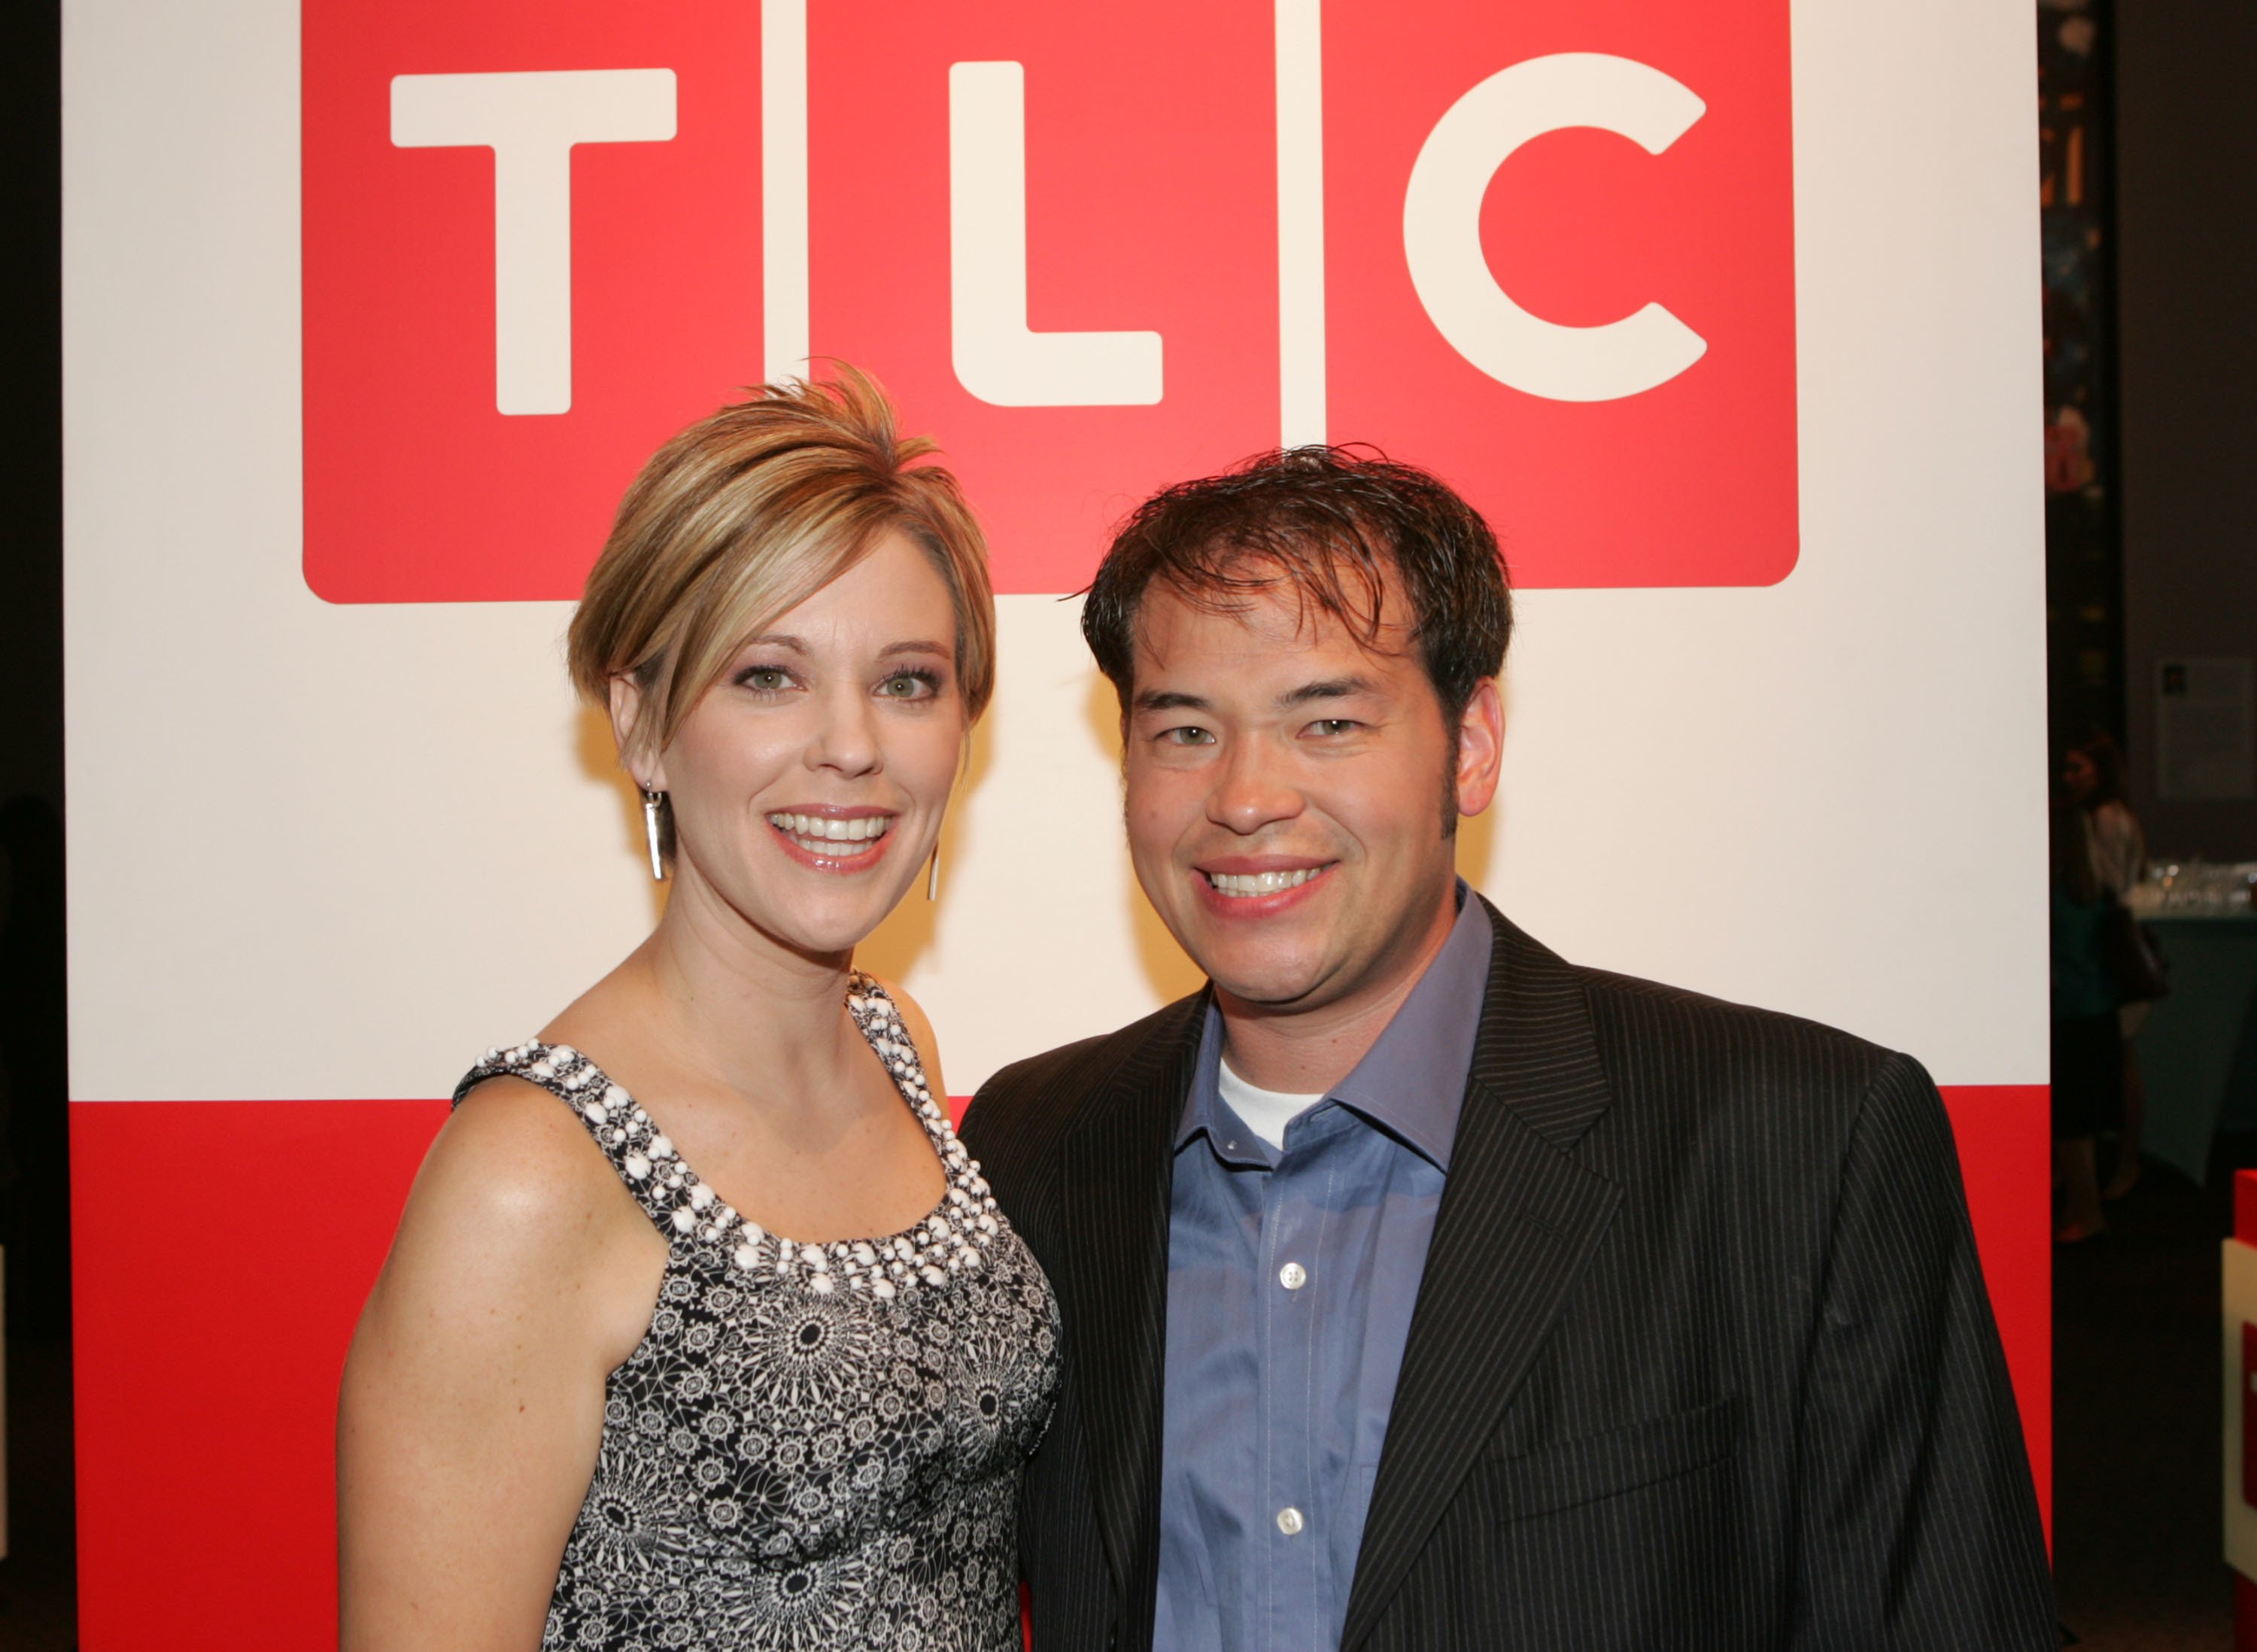 Jon and Kate Gosselin attend the Discovery Upfront Presentation. | Source: Getty Images